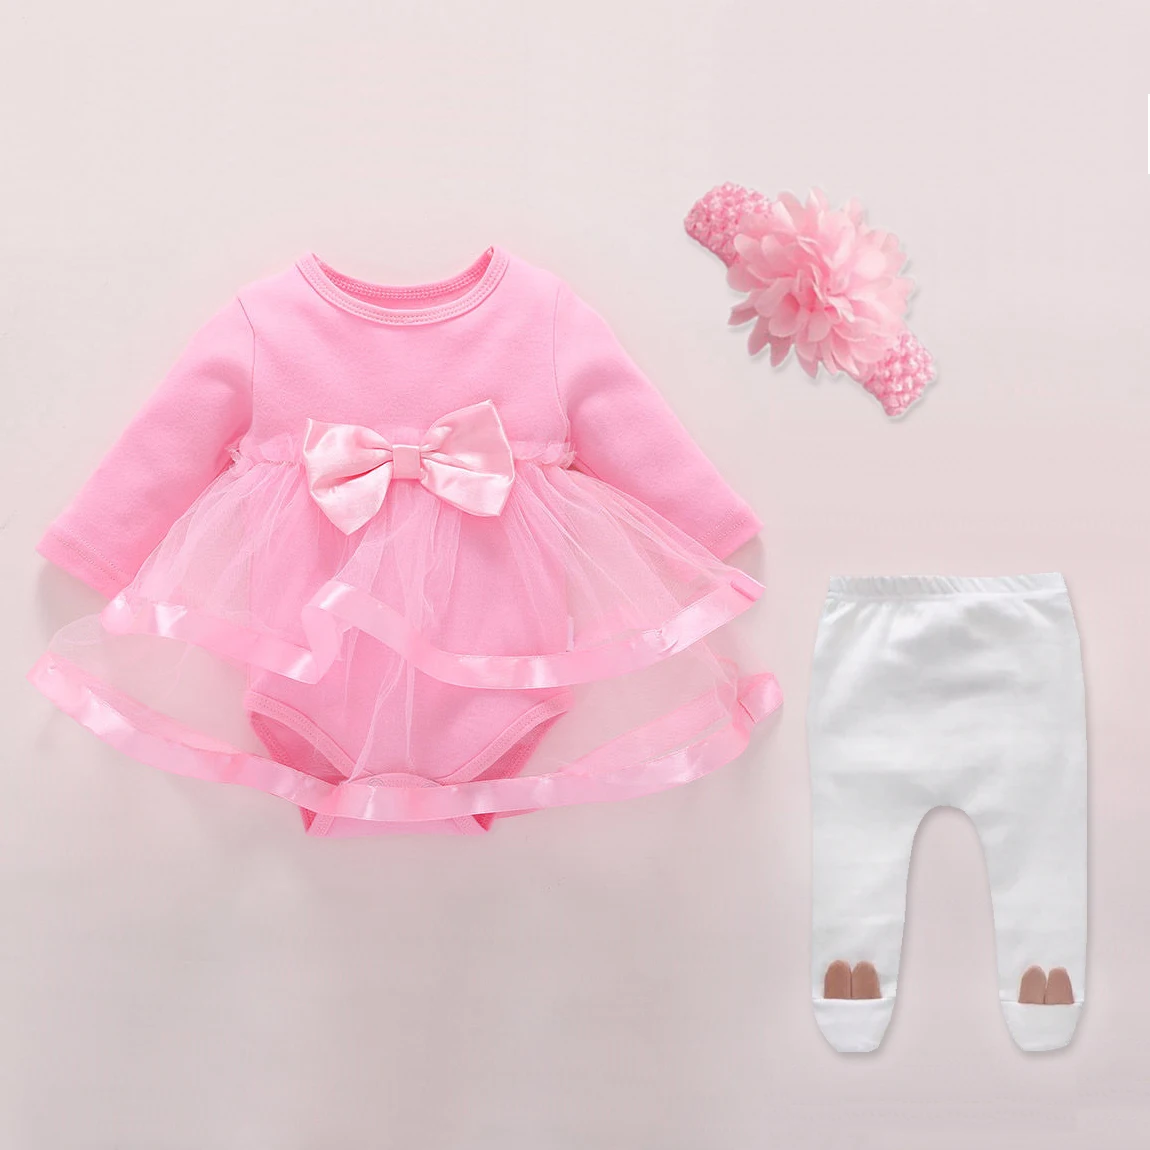 Baby Girls Infant Newborn Dress Foot Pants Autumn Wedding Party Birthday Outfits 0 3 Month dress headband Christening Gown images - 6